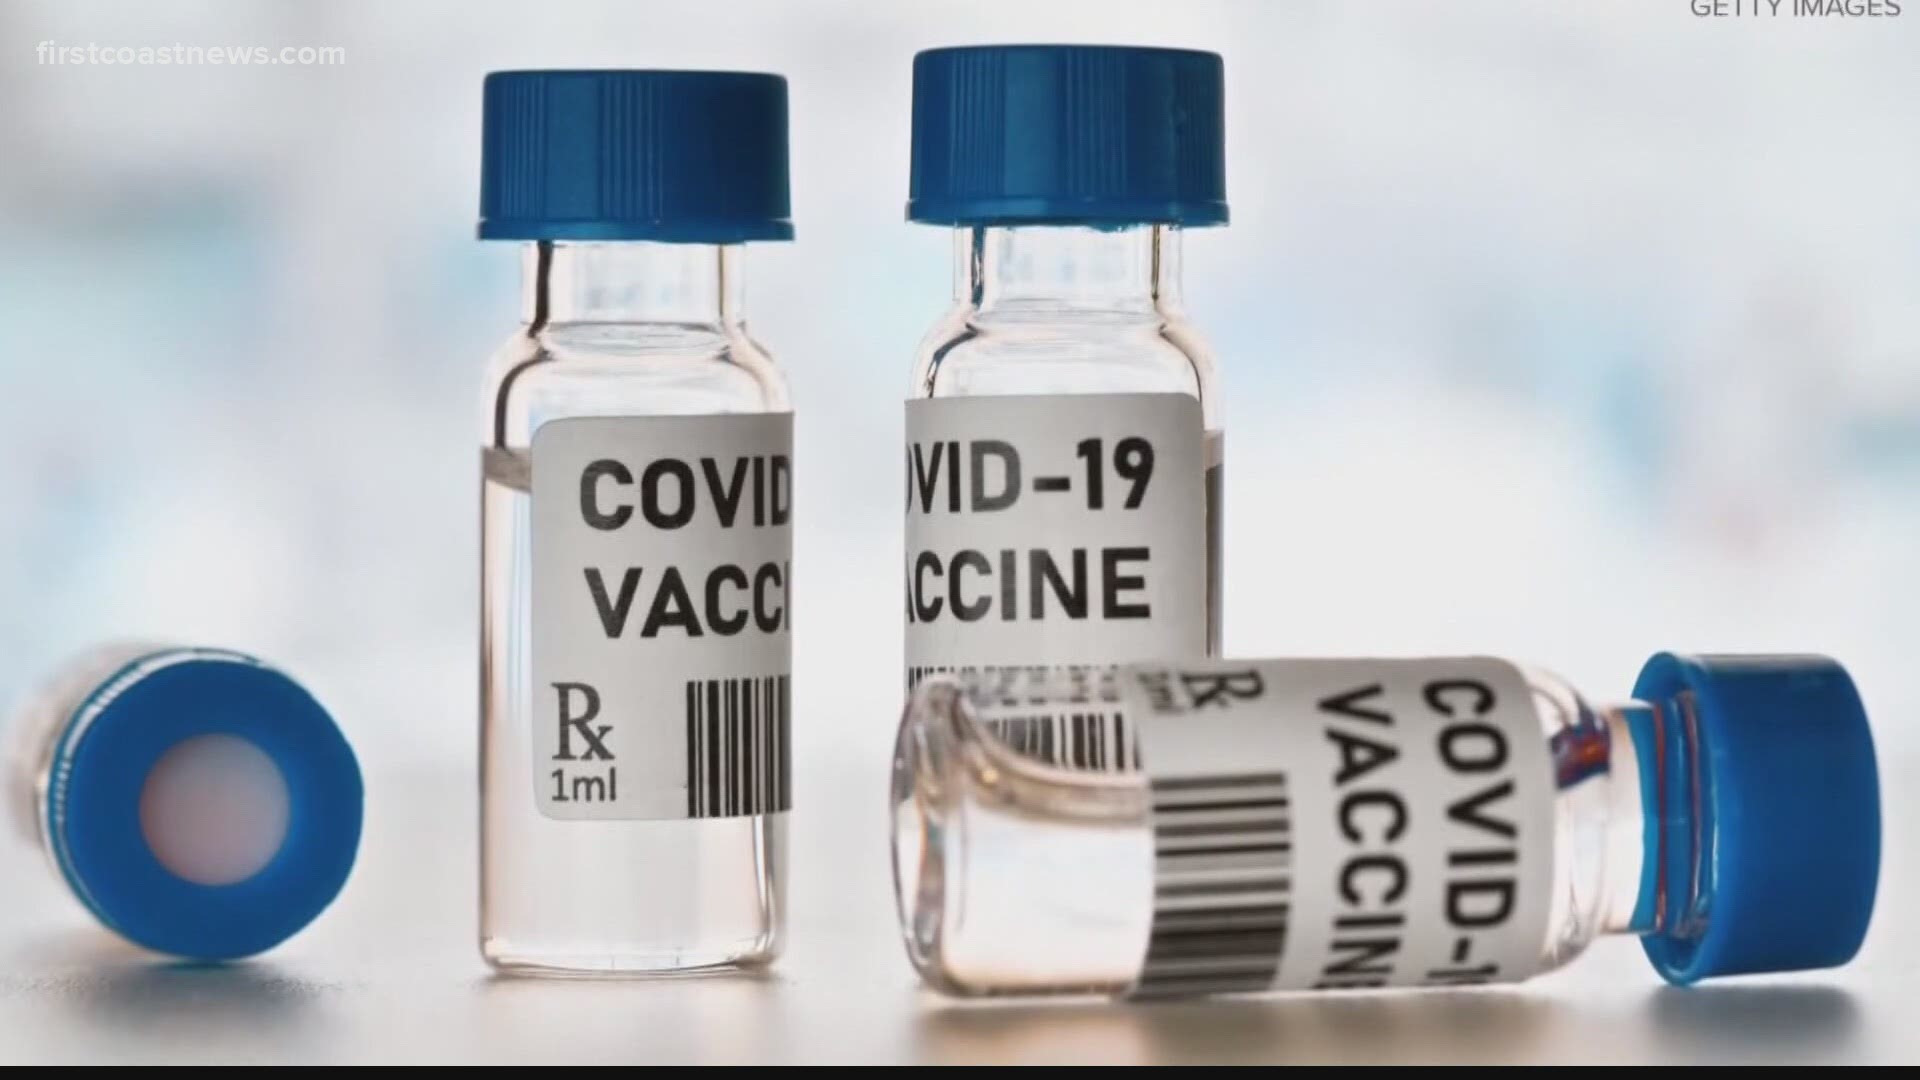 As we get closer to the start of the school year, many parents are wondering why there aren't COVID-19 vaccines for kids under 12 yet.